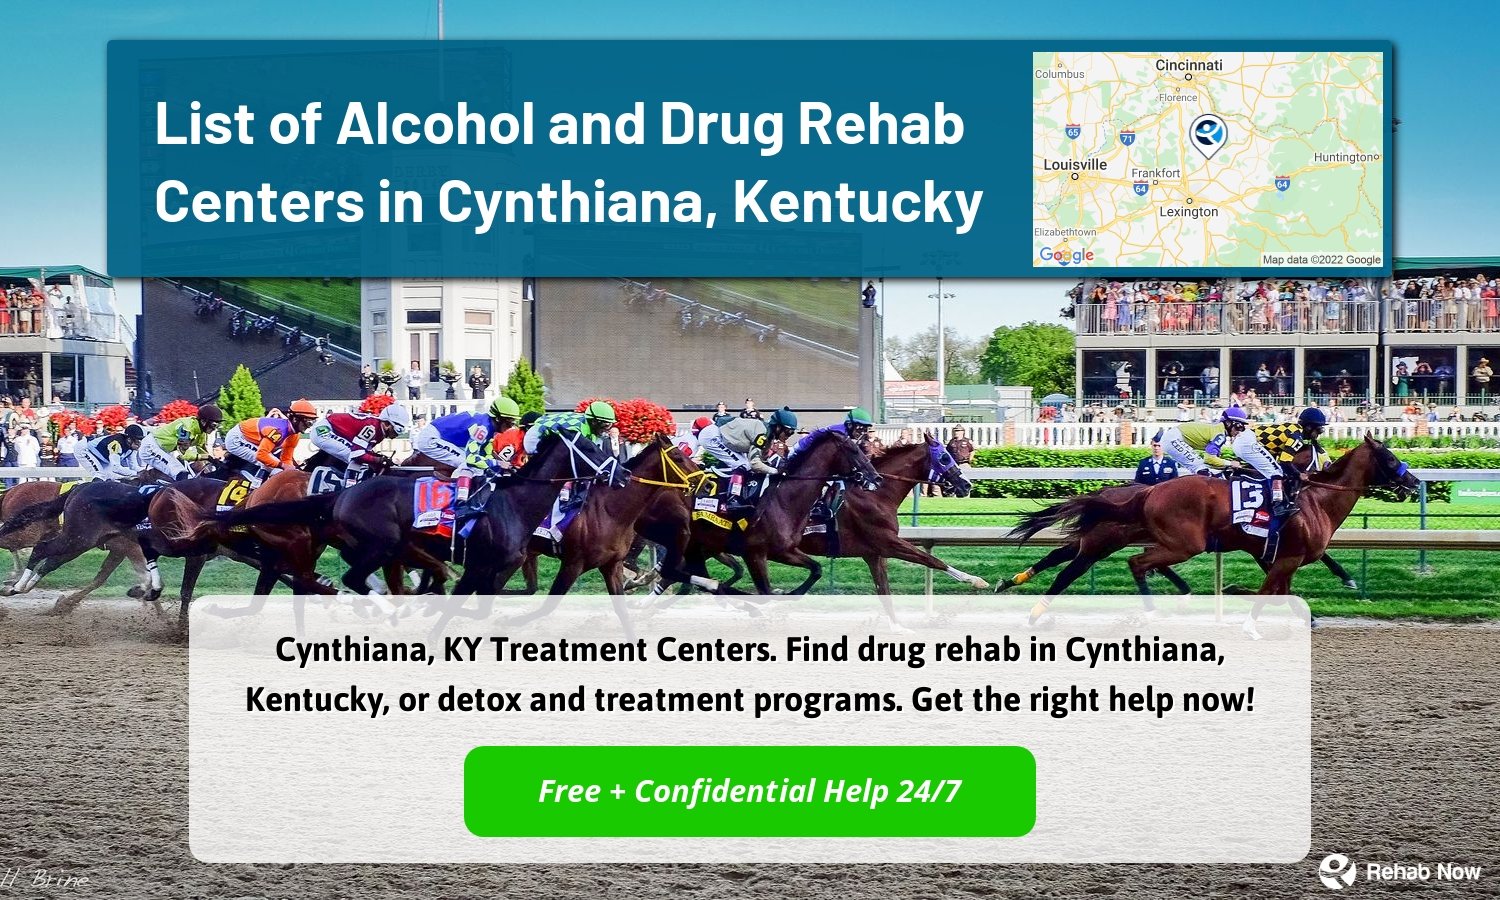 Cynthiana, KY Treatment Centers. Find drug rehab in Cynthiana, Kentucky, or detox and treatment programs. Get the right help now!